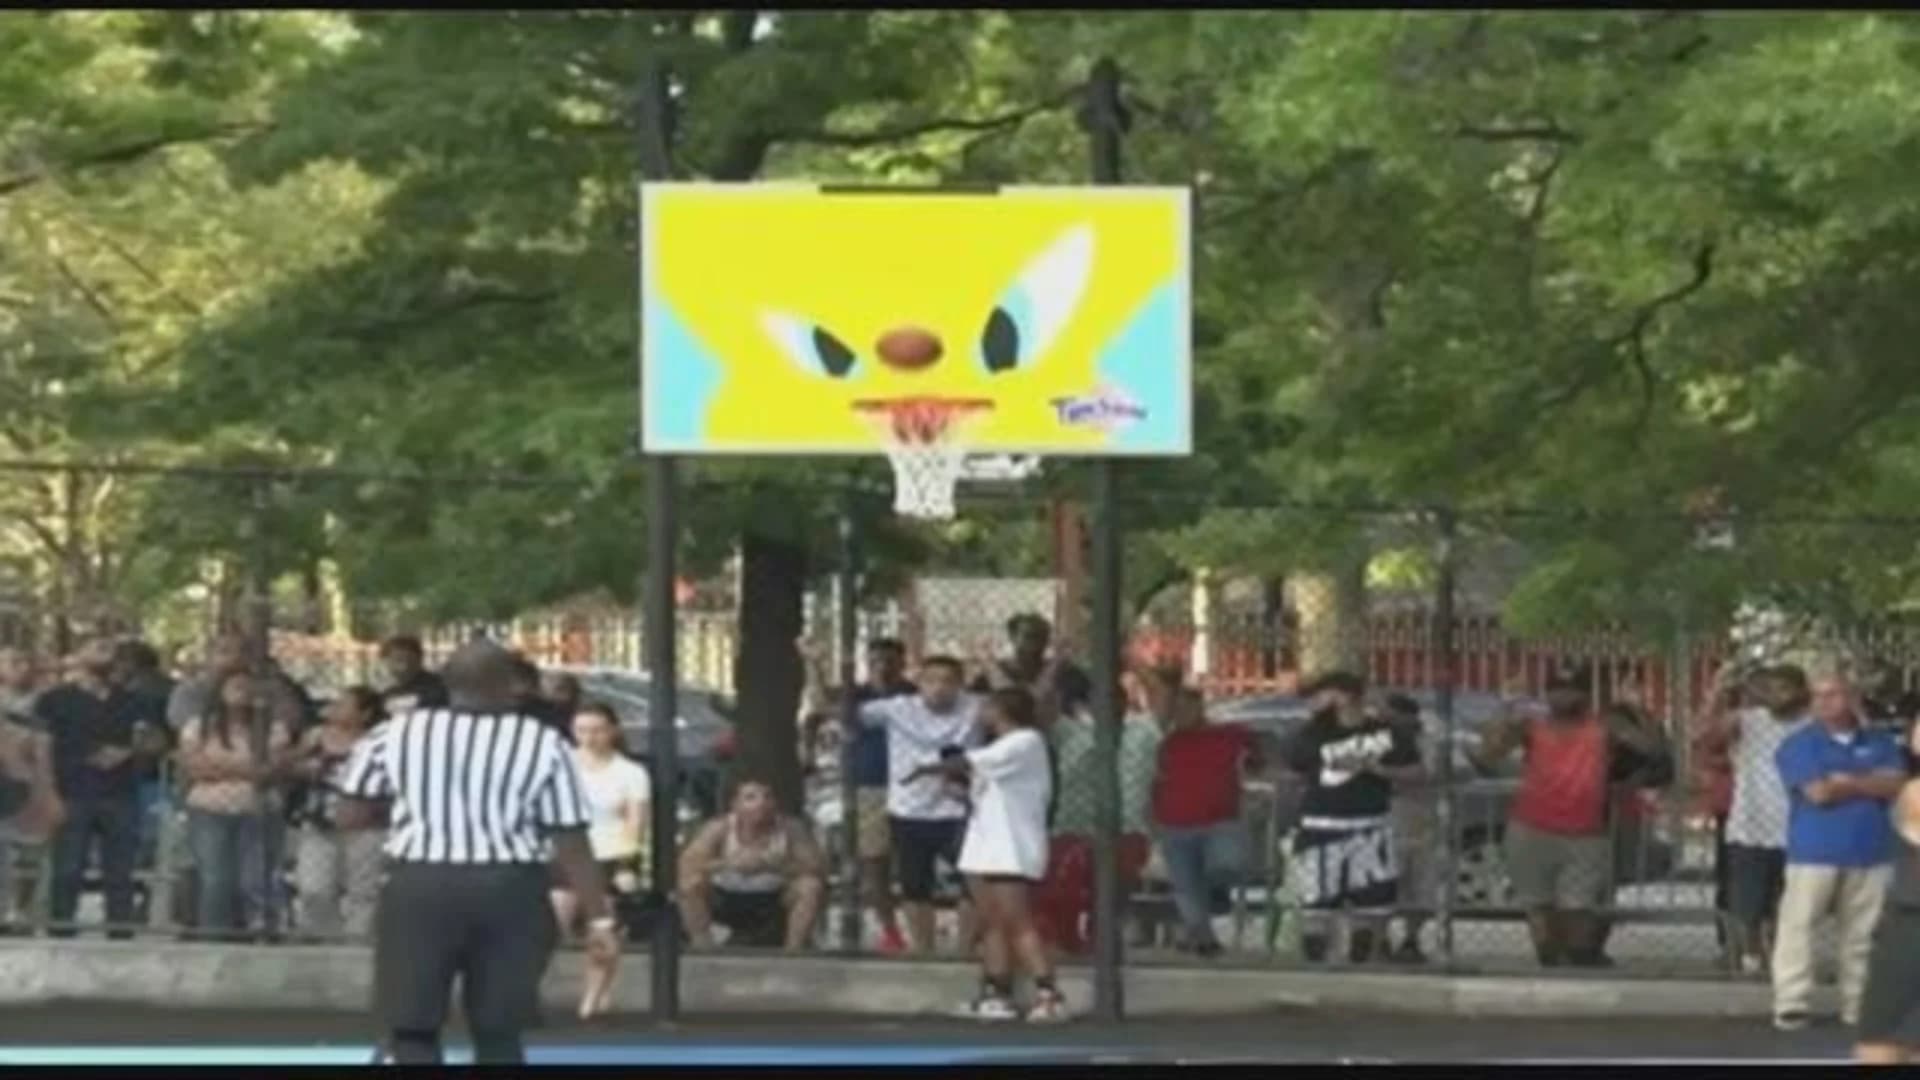 Williamsburg basketball court unveils mural of  iconic 'Space Jam' tune squad